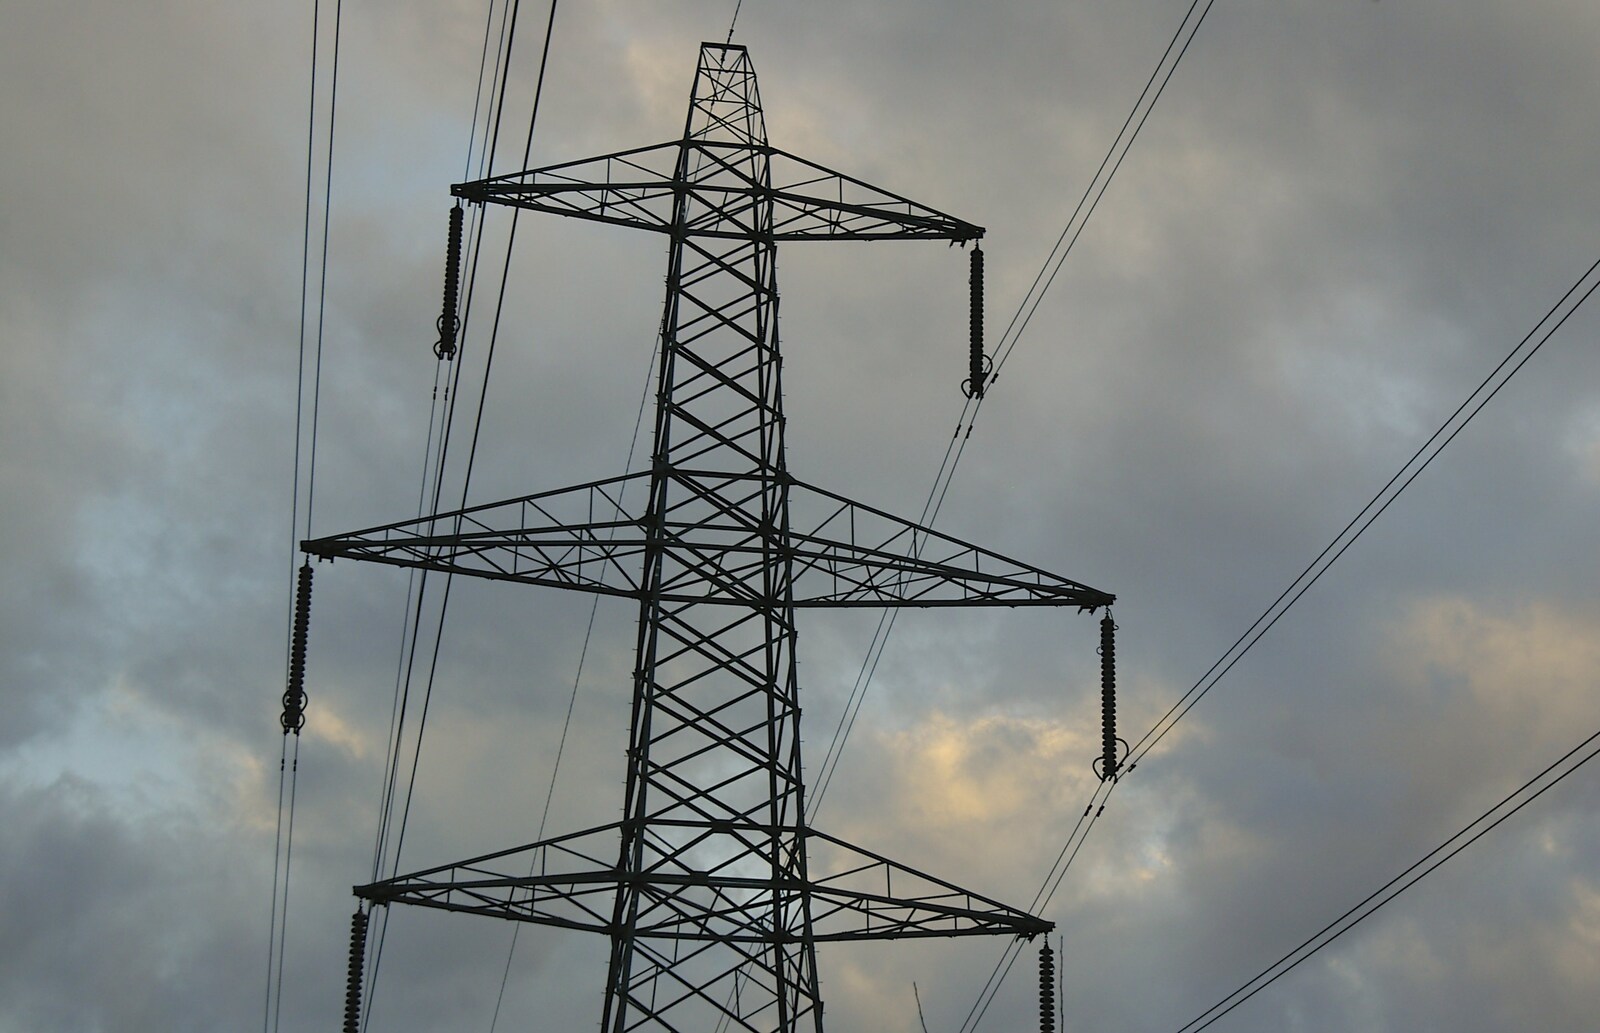 The looming presence of an electricity pylon from California Snow: San Bernadino State Forest, California, US - 26th March 2006